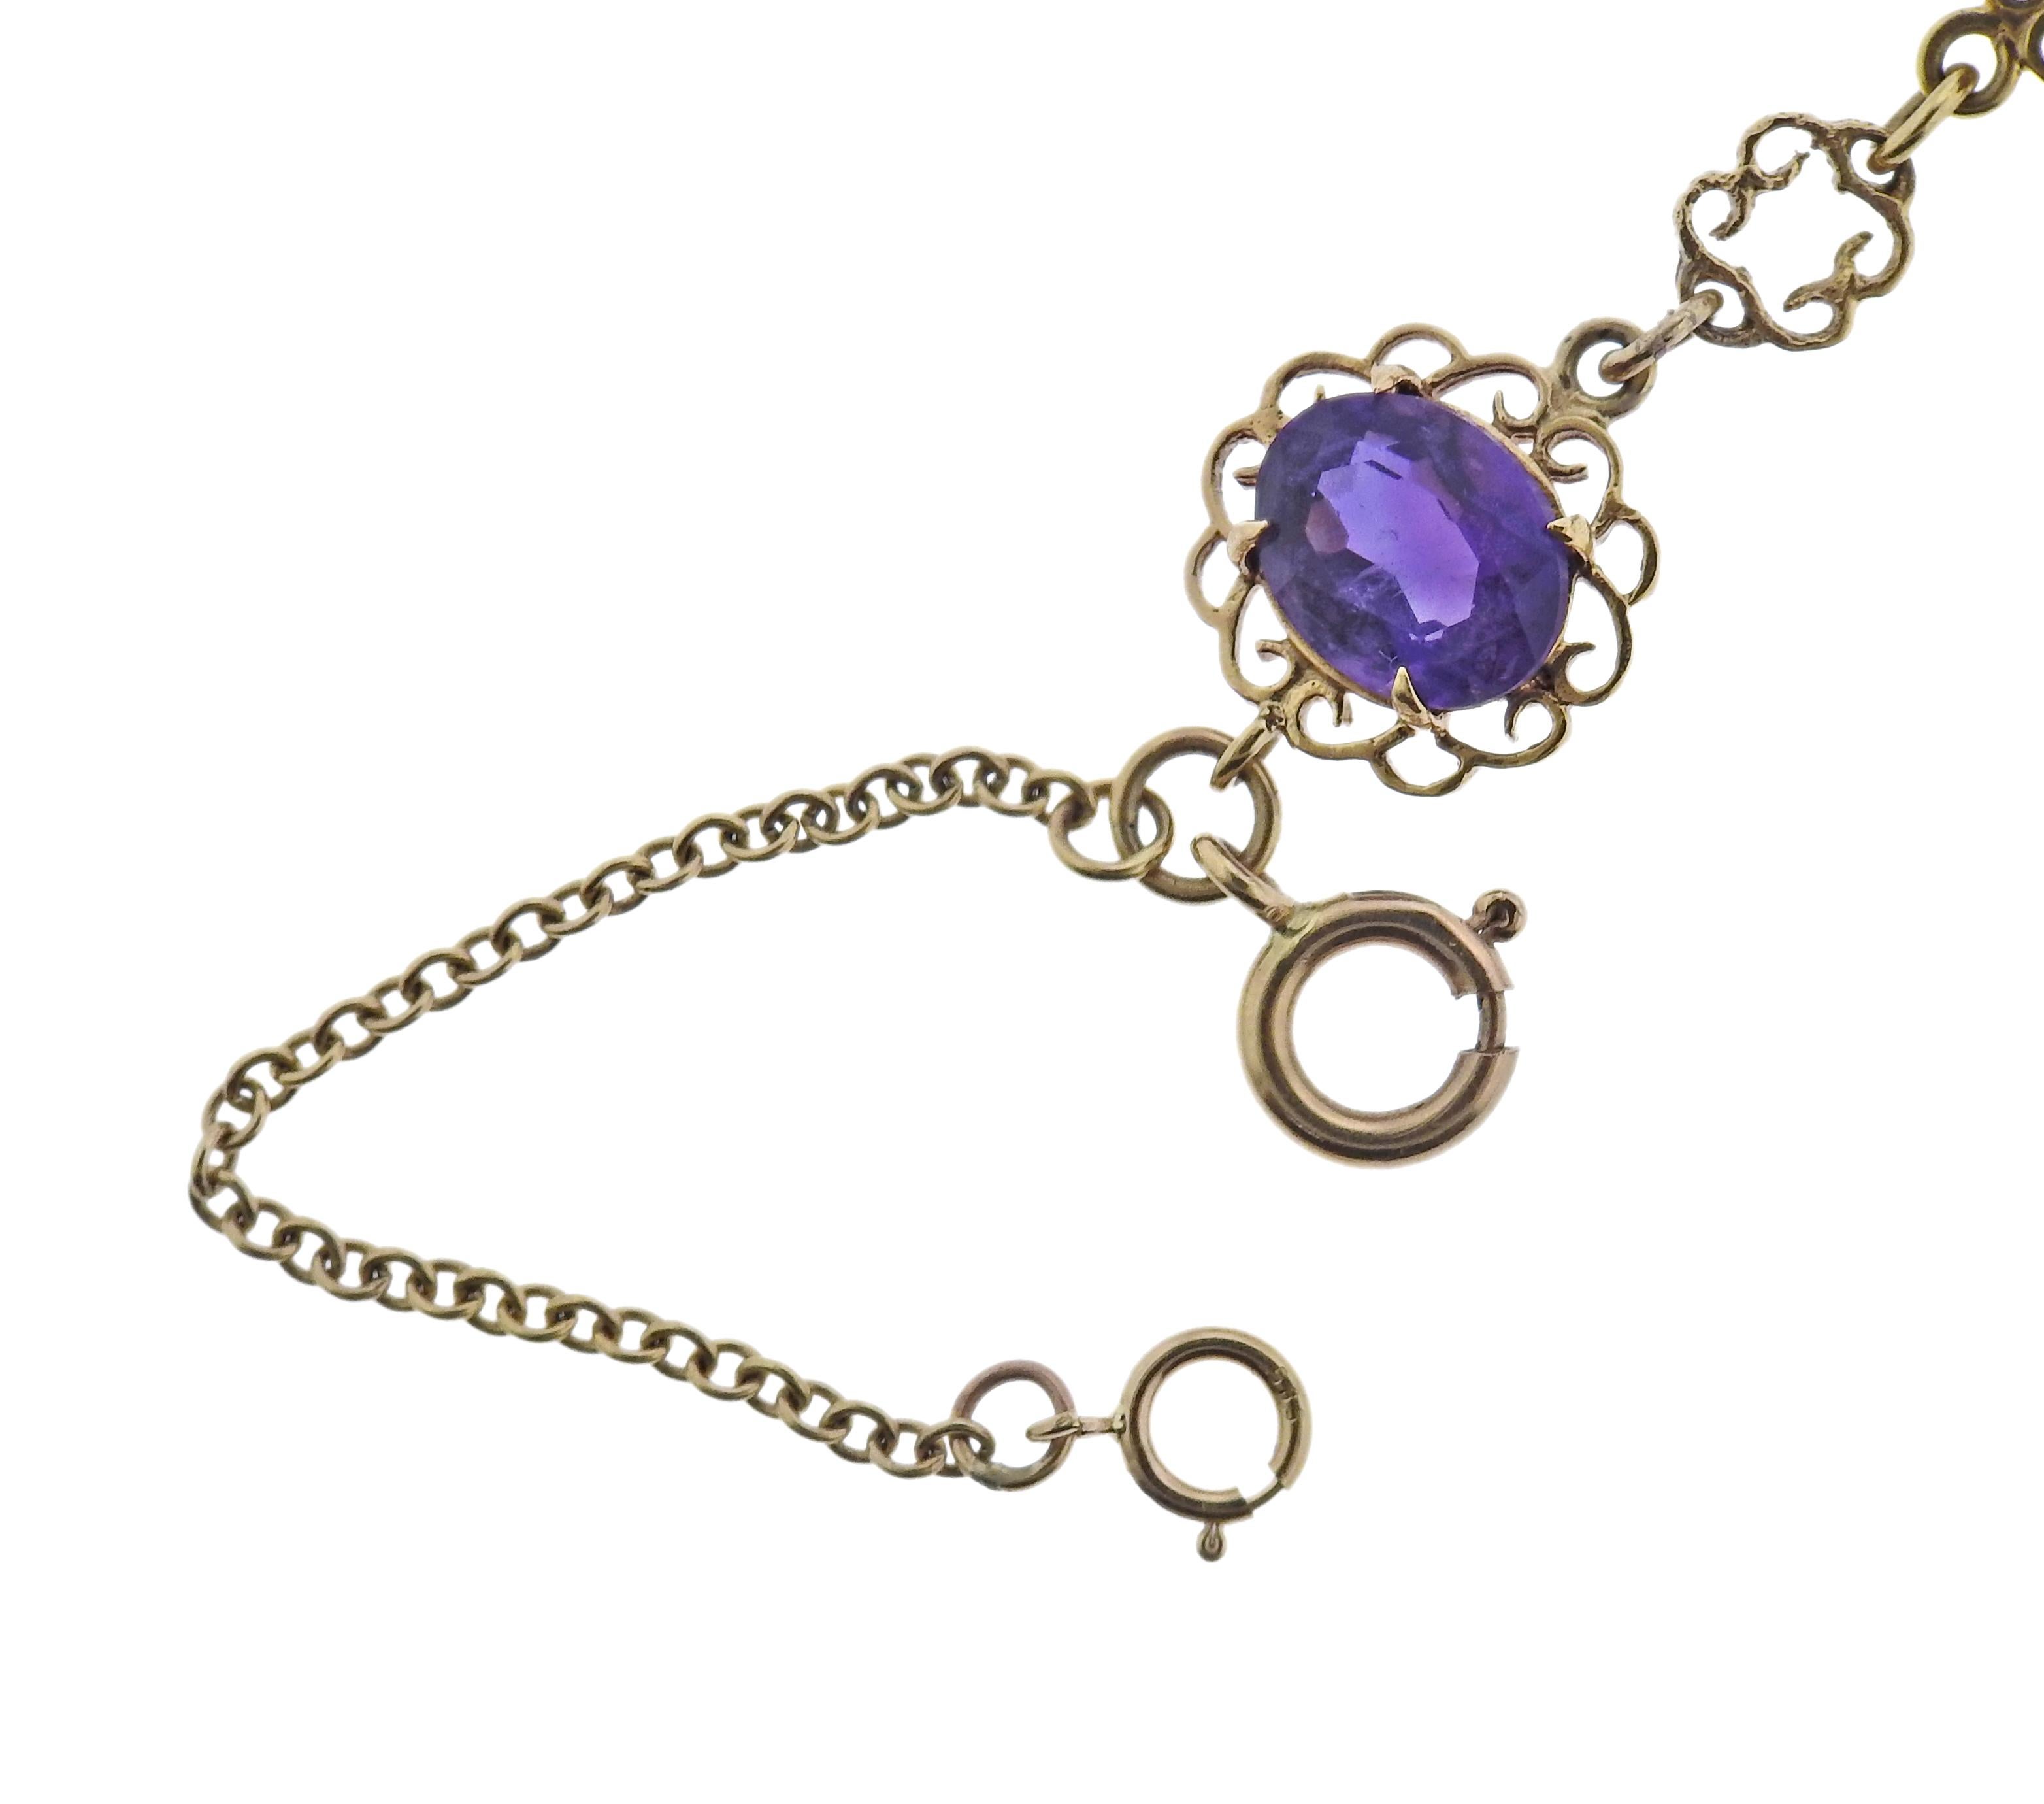 English 9k Gold Amethyst Bracelet In Excellent Condition For Sale In New York, NY